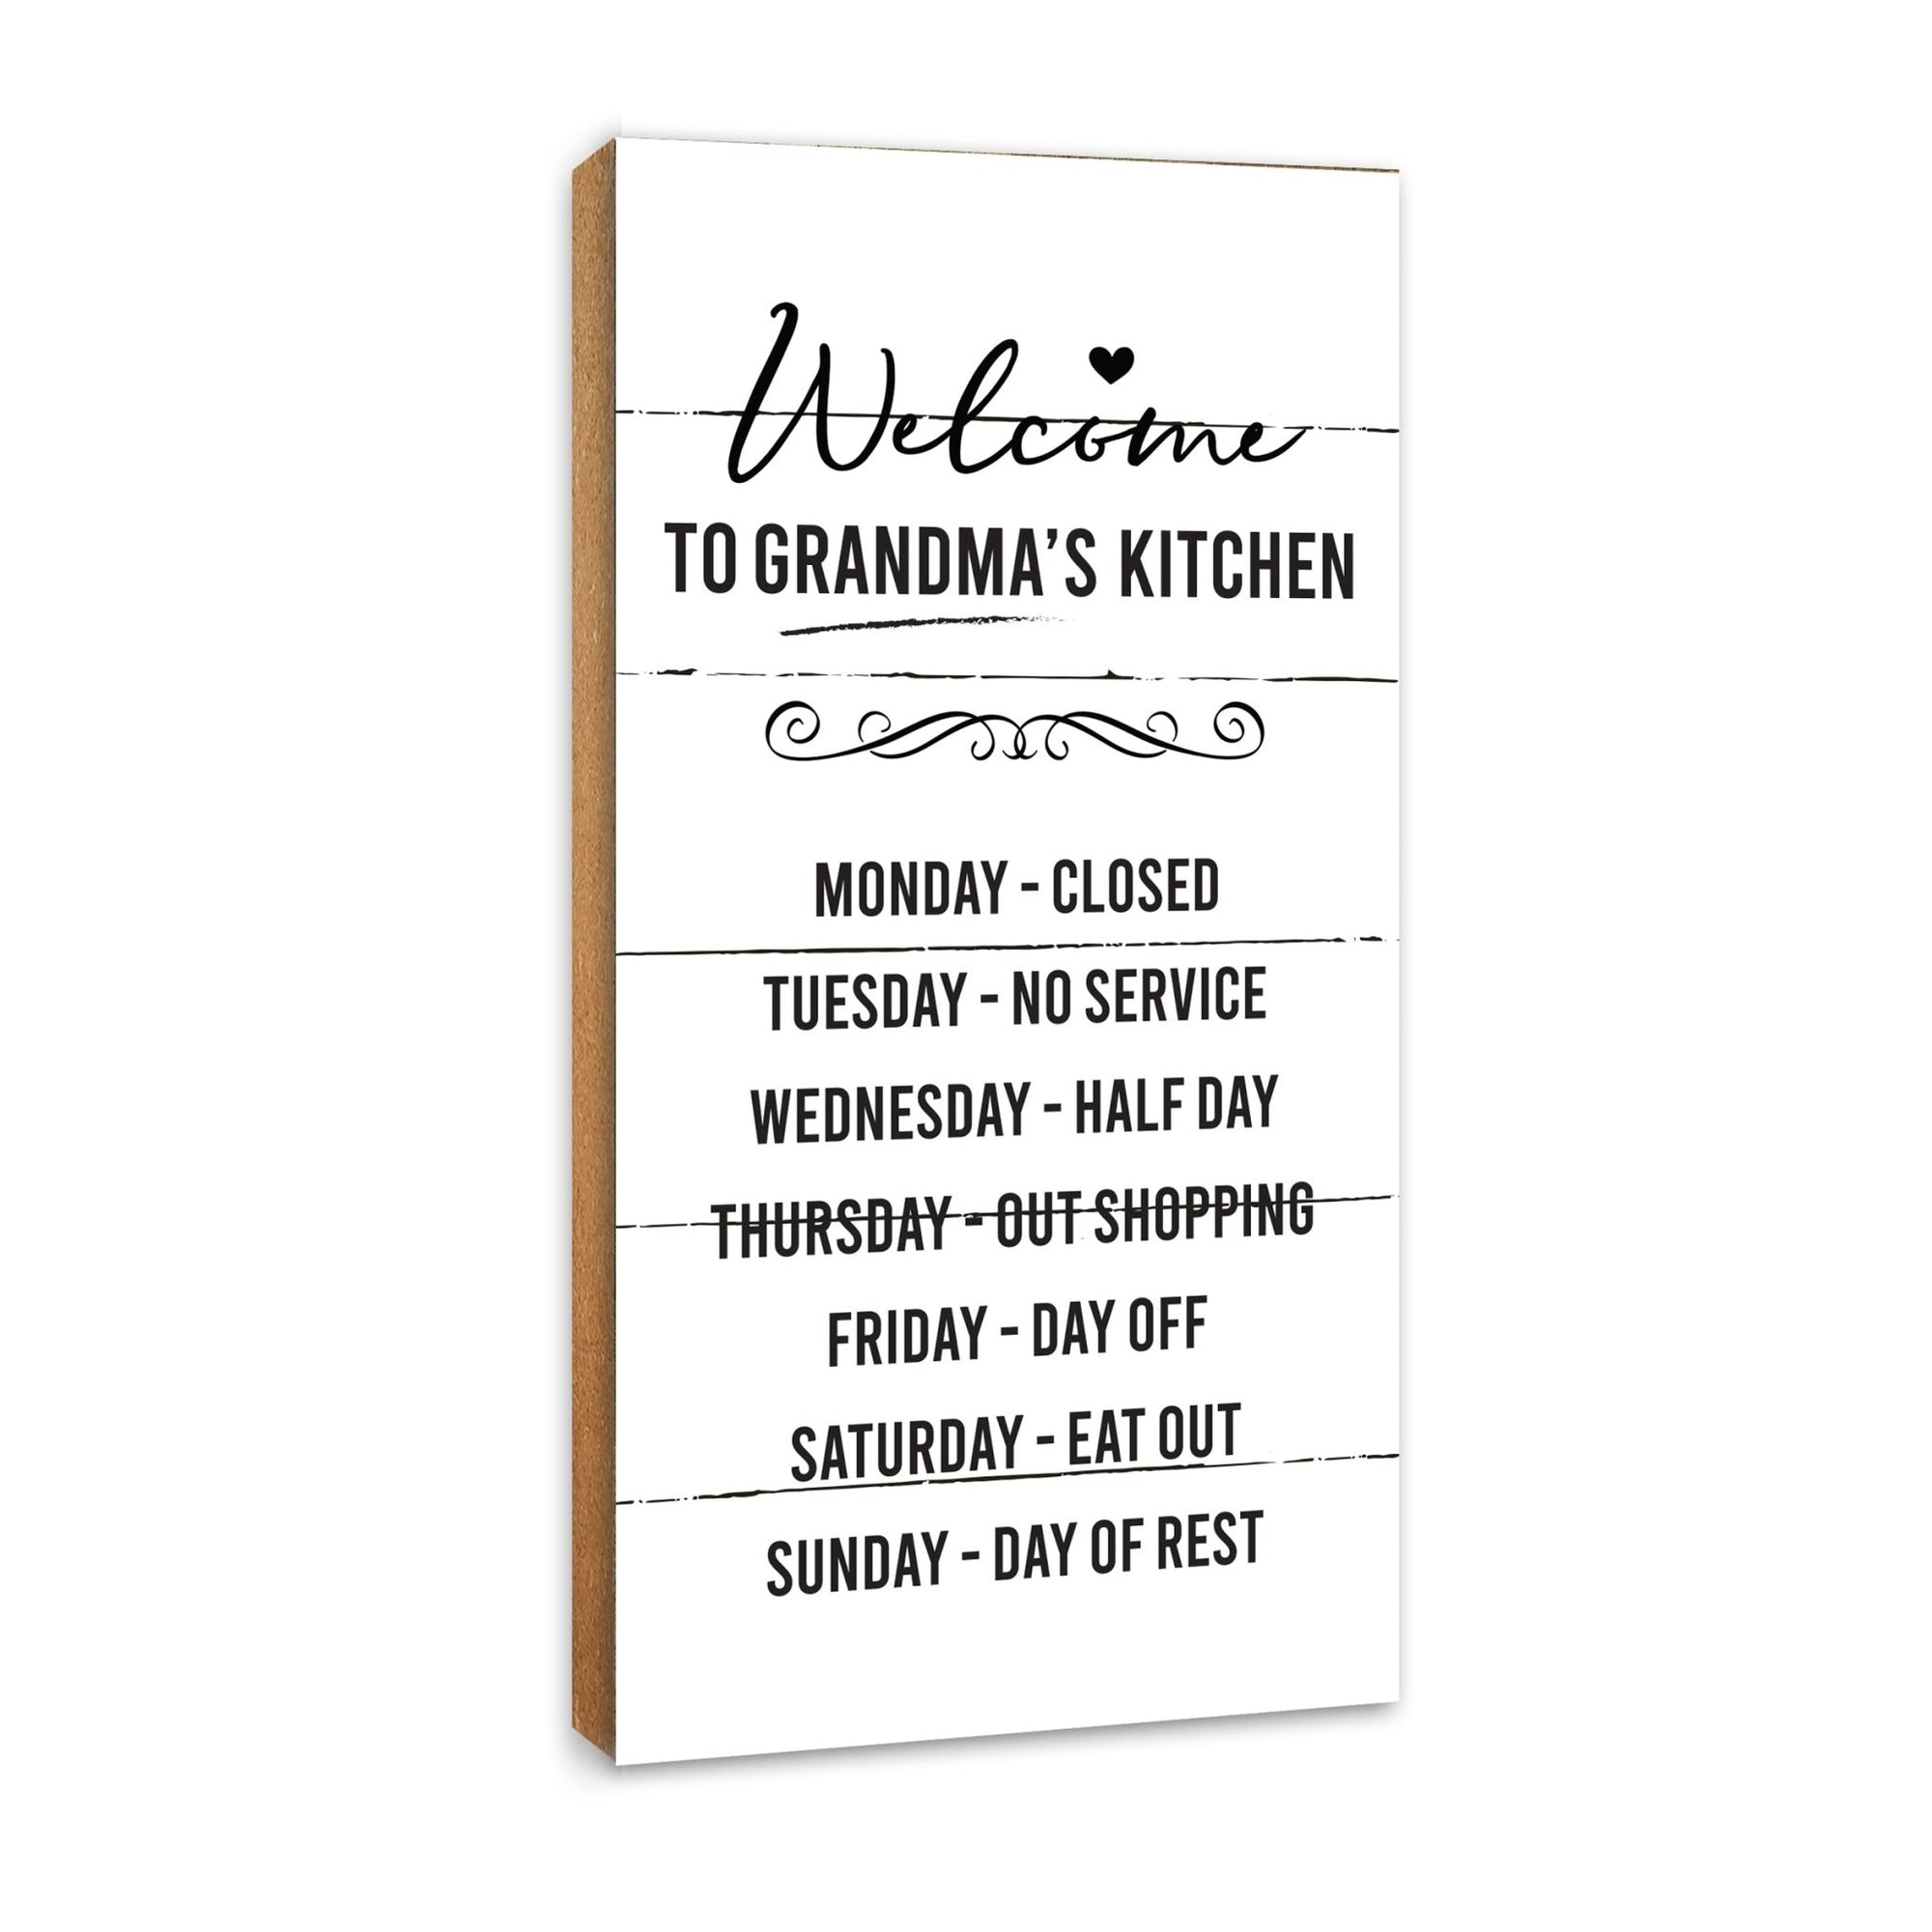 Rustic Kitchen Wooden Wall Plaque Home Décor or Gift Ideas - Welcome To Grandma's Kitchen - LifeSong Milestones